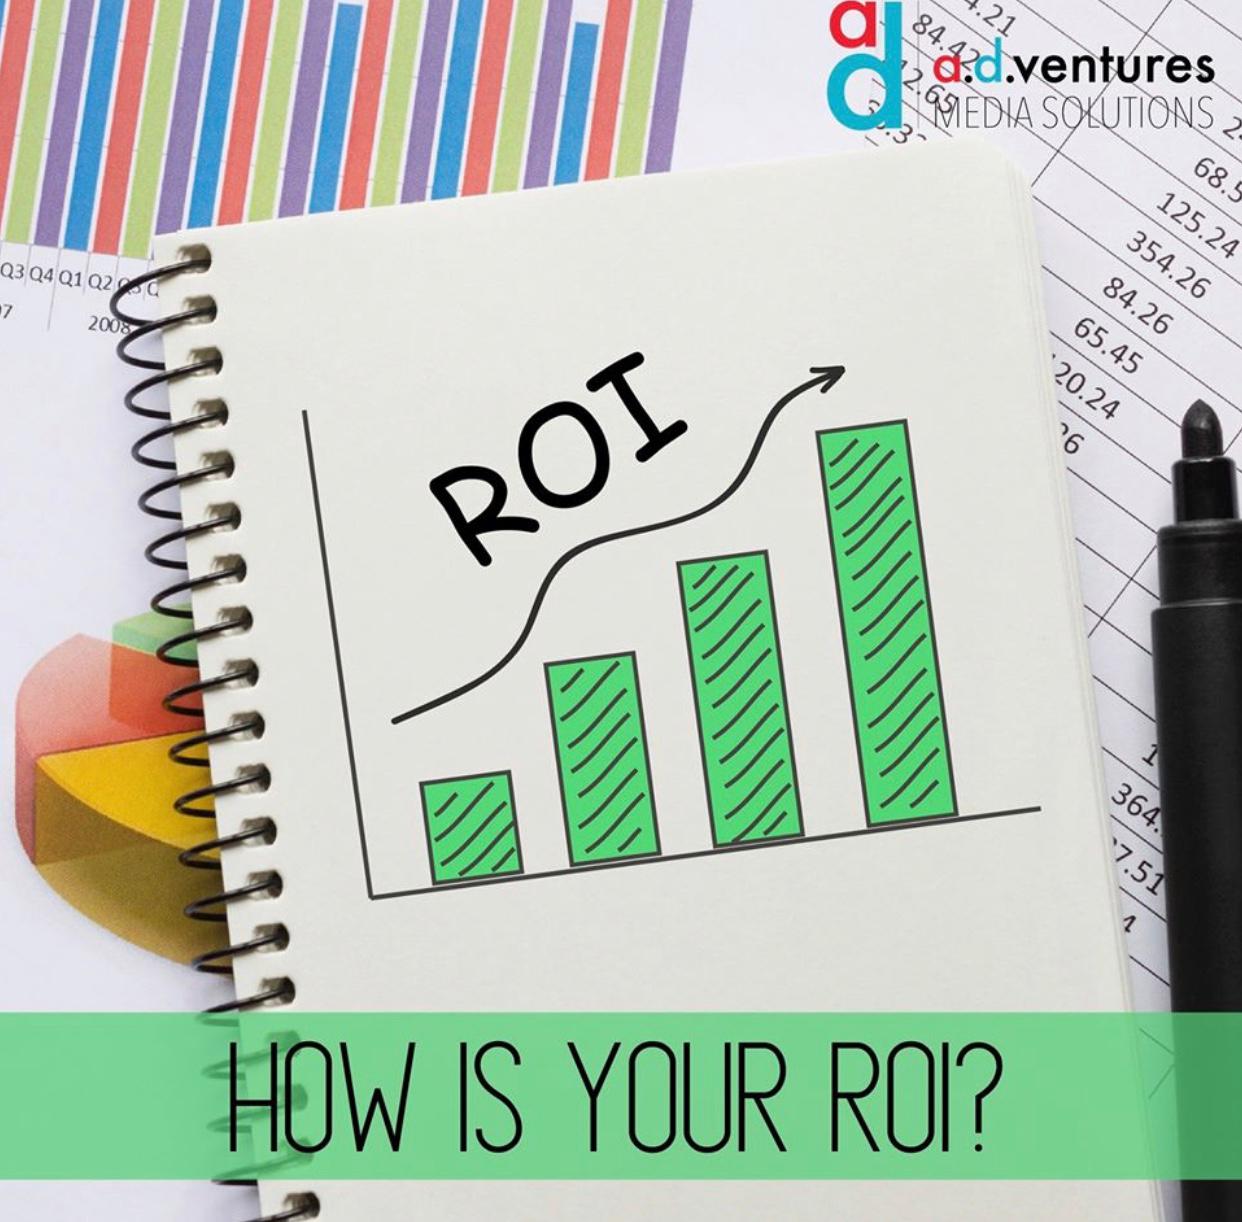 Is Your Marketing Producing ROI?